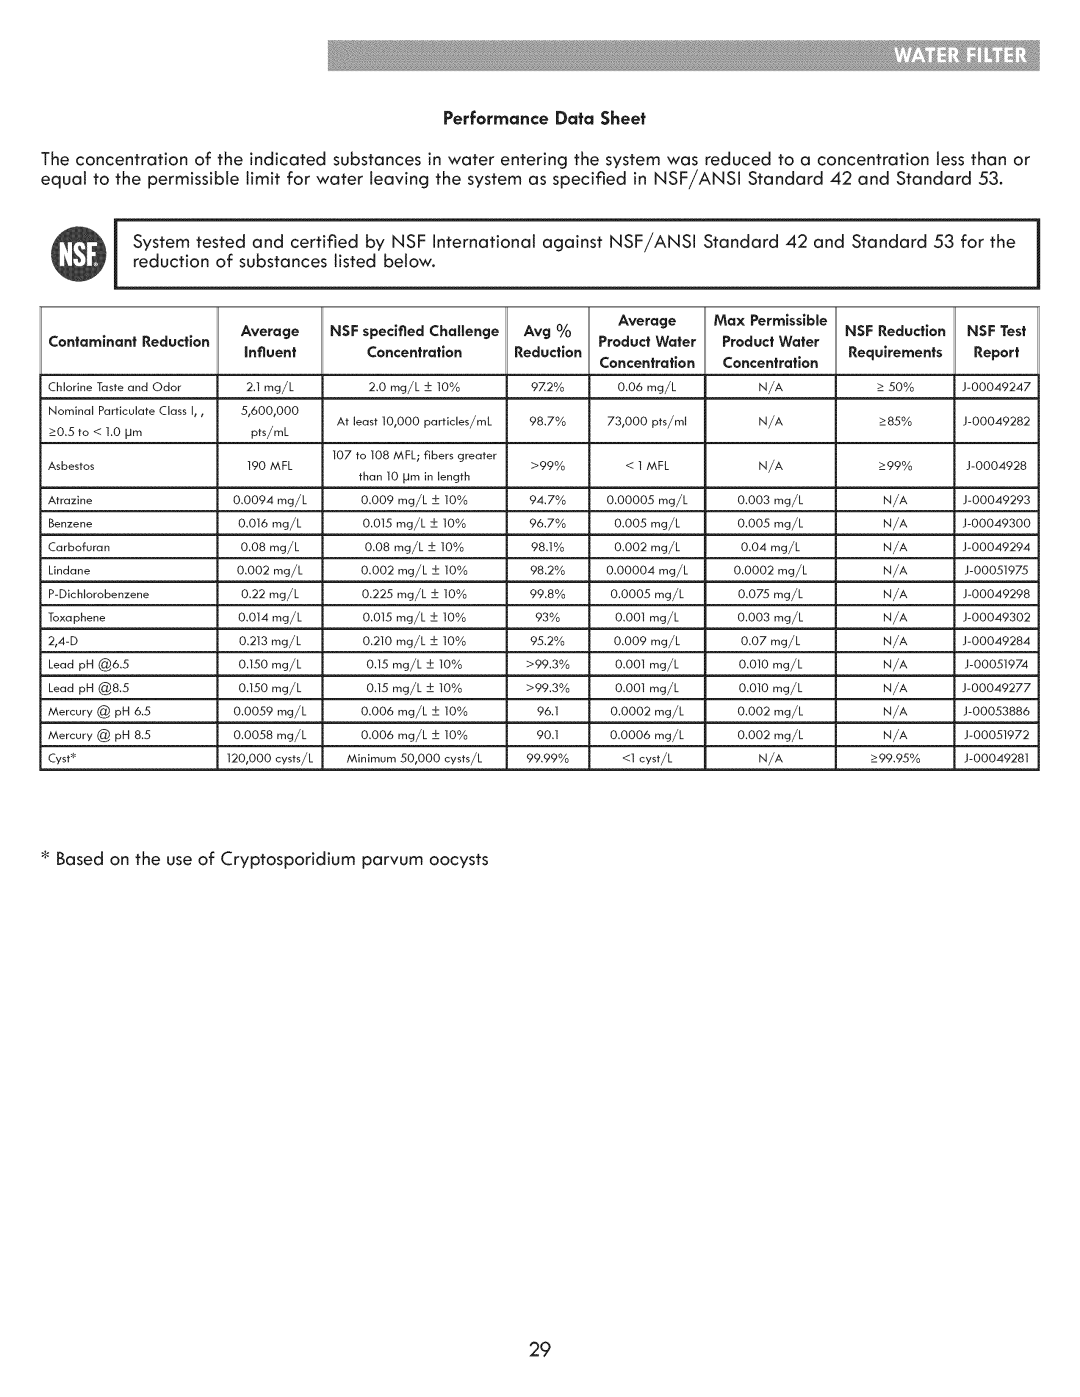 Kenmore 795.7103 manual Performance Data Sheet, Report, 9Z2%, _>50%, 5,600,000, 73,000, 50,000 cysts/L, 99.99% 